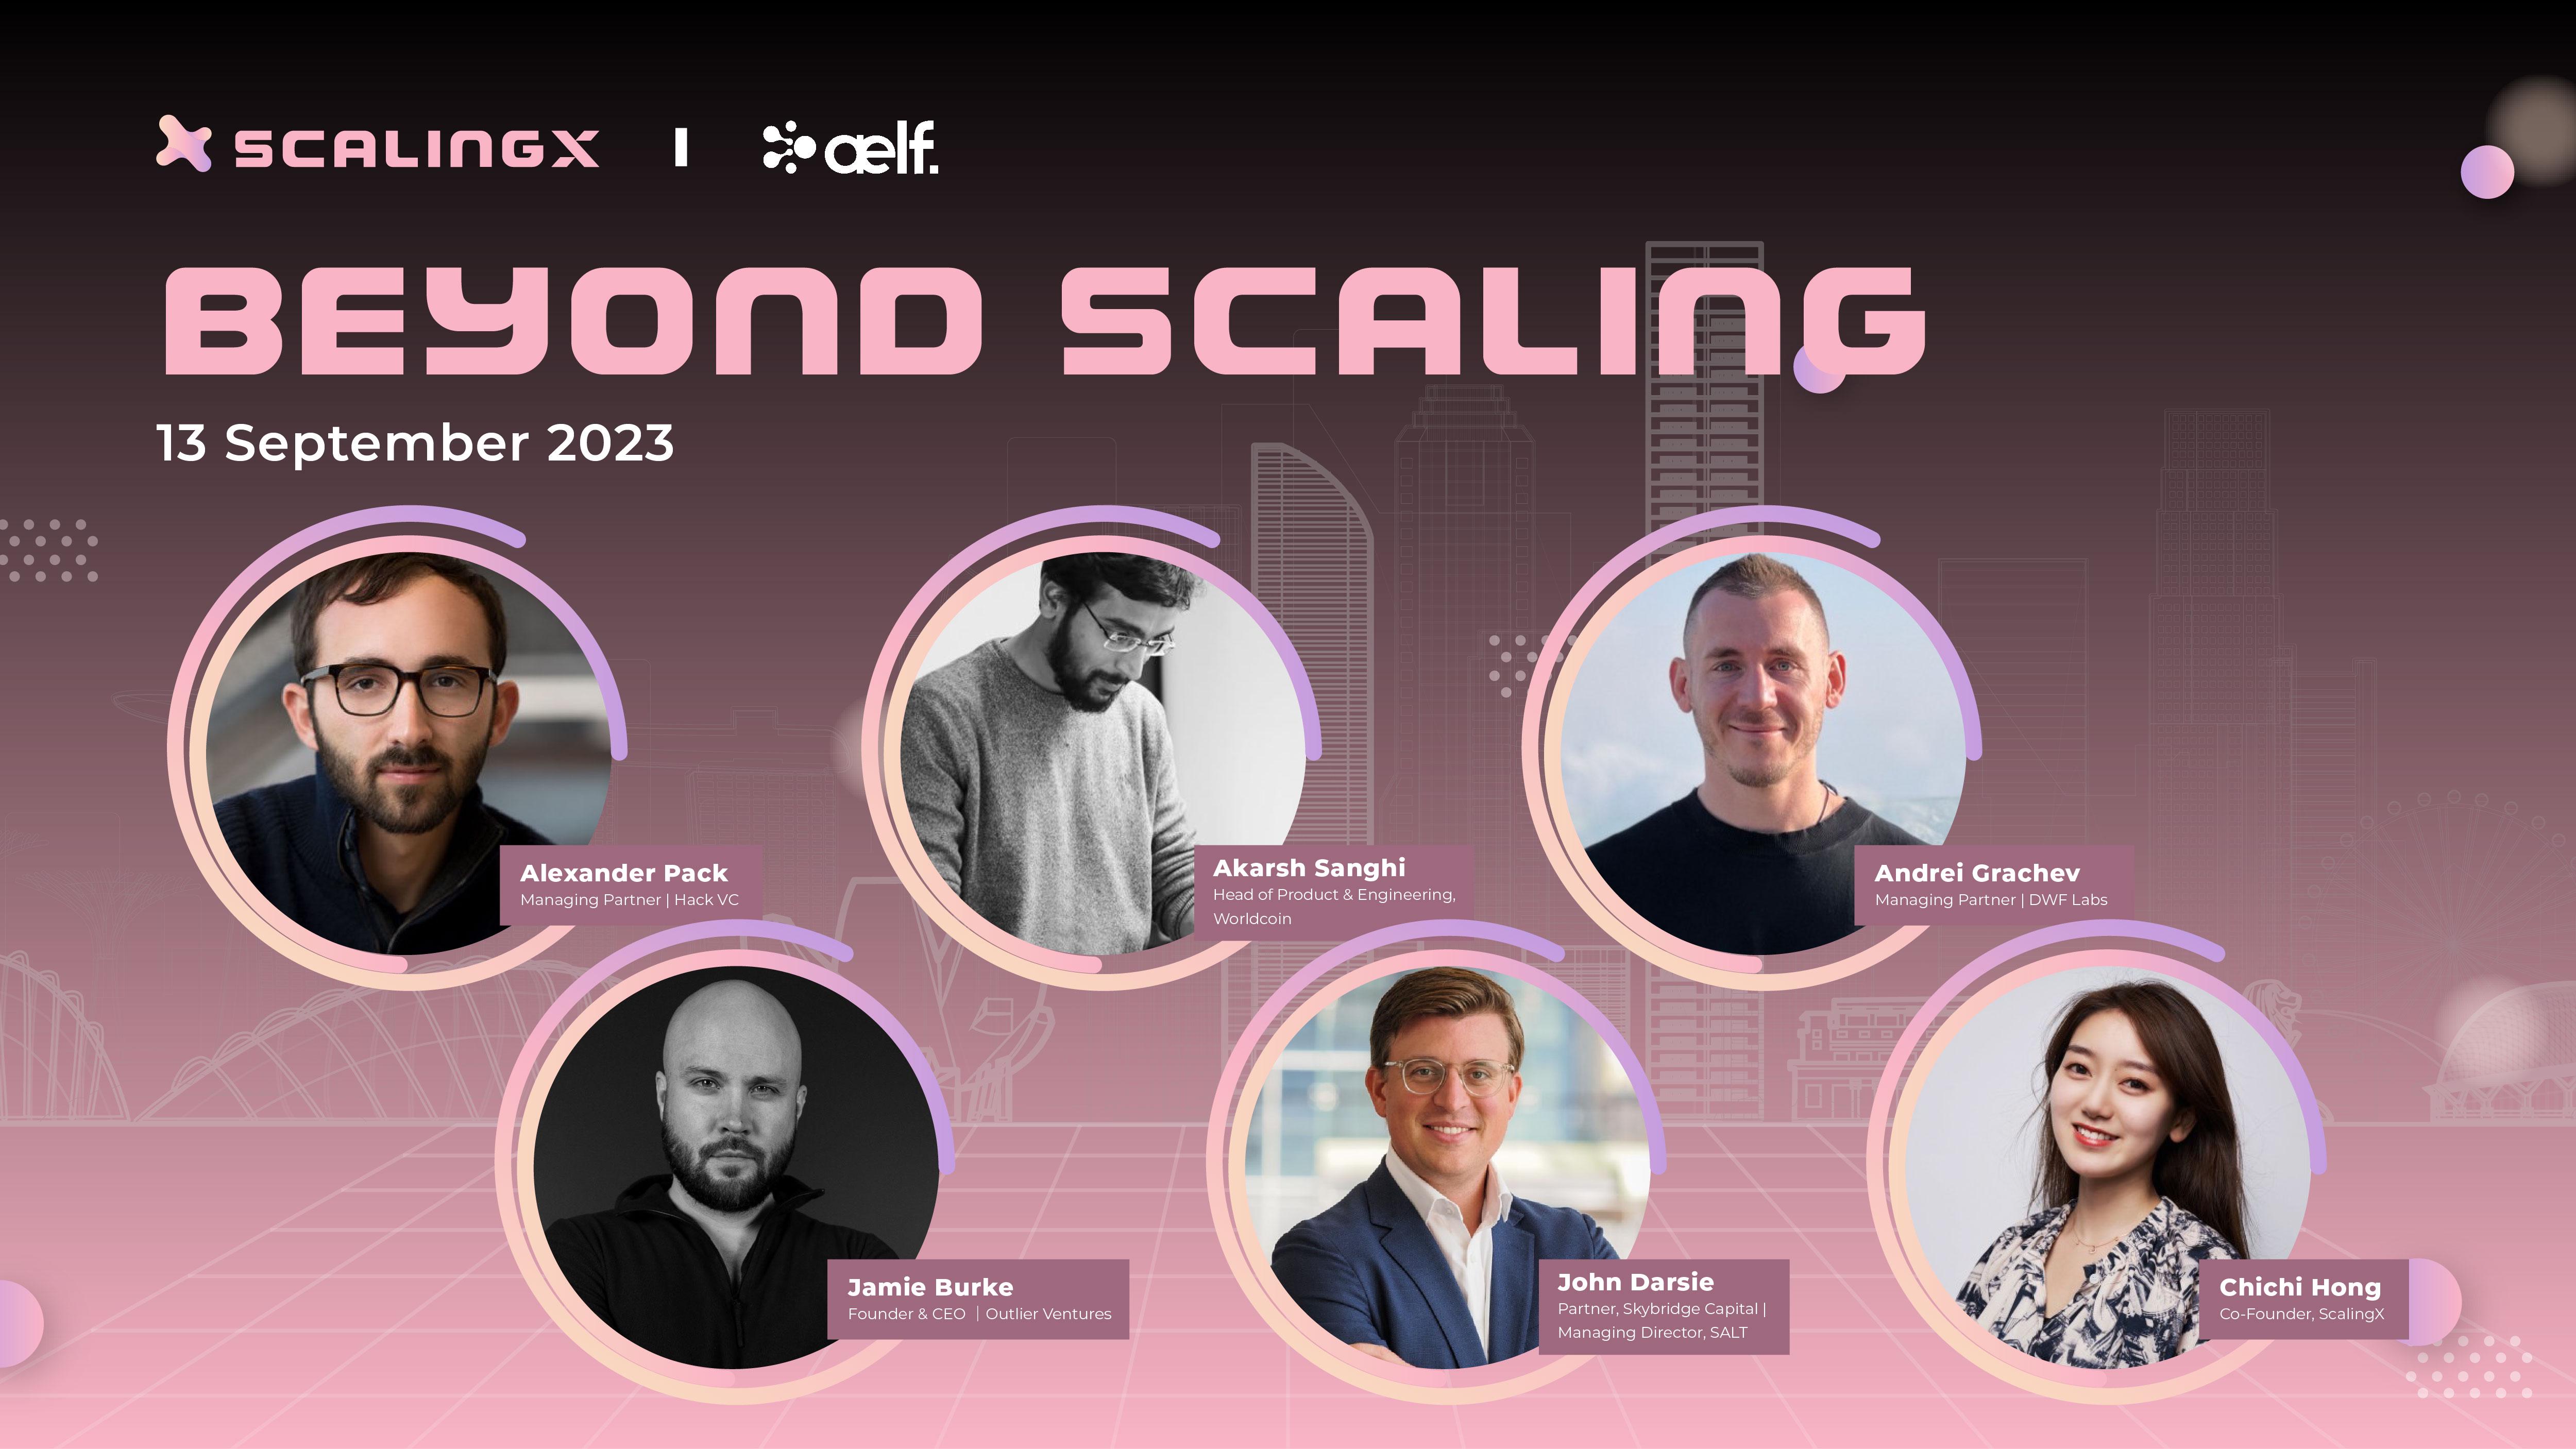 ScalingX - "Beyond Scaling" Token2049 Afterparty 圆桌讨论精彩回顾